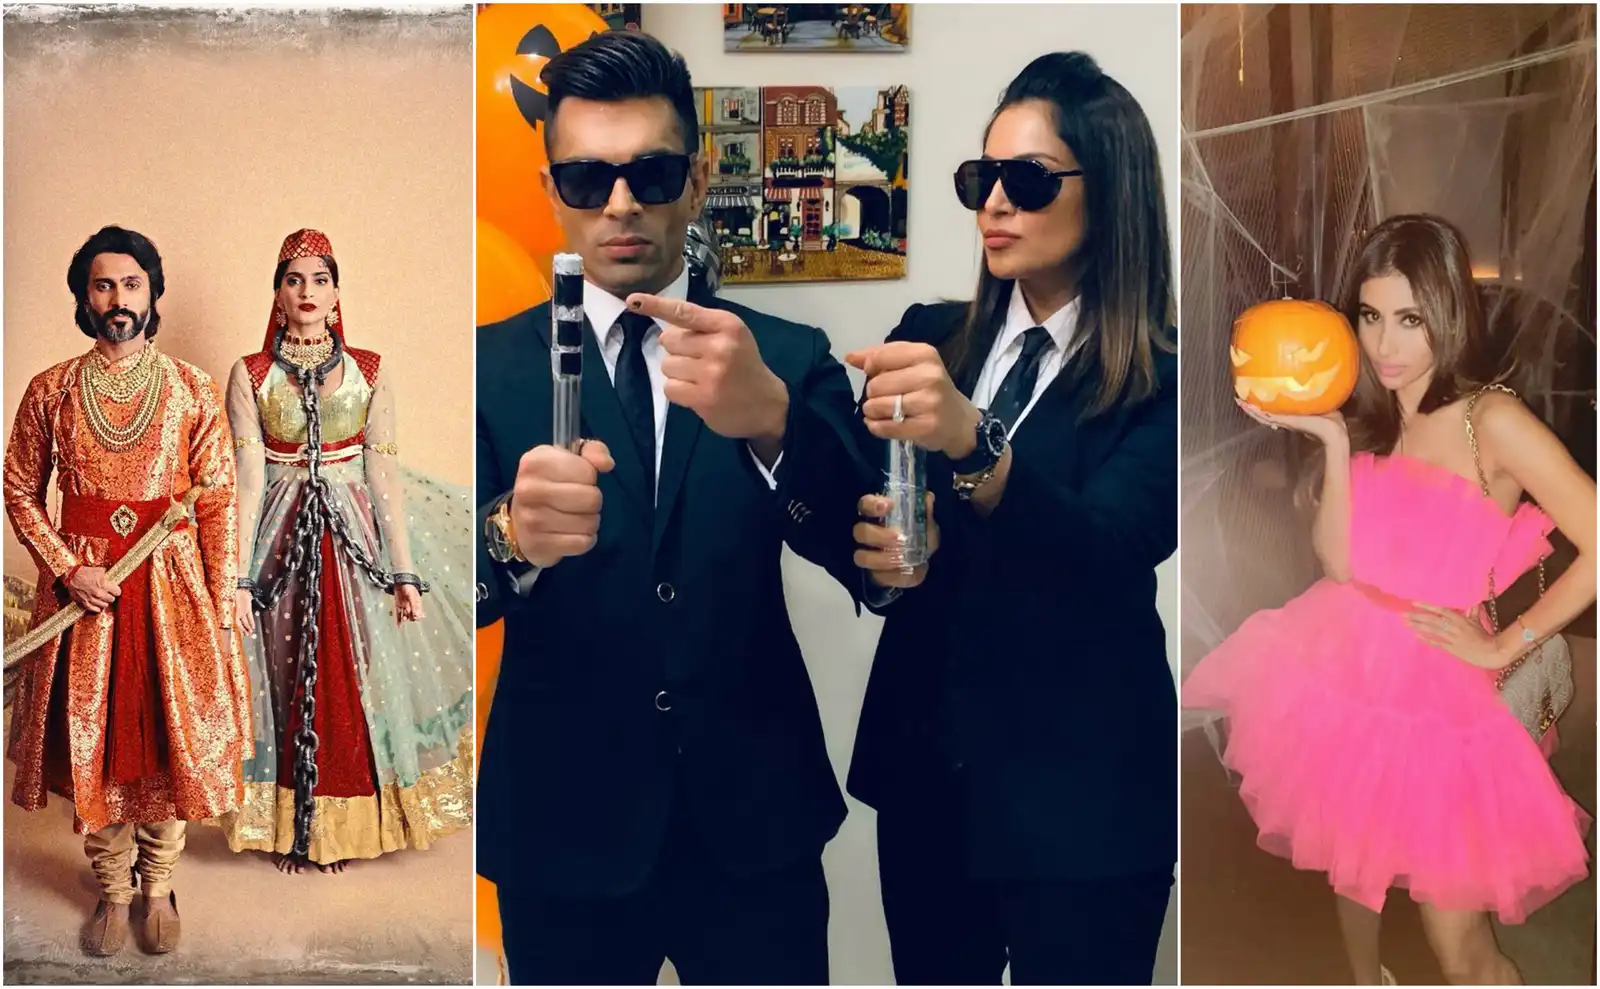 Halloween 2019: Sonam Kapoor, Karan Singh Grover And Others Get Creative With Their Costumes